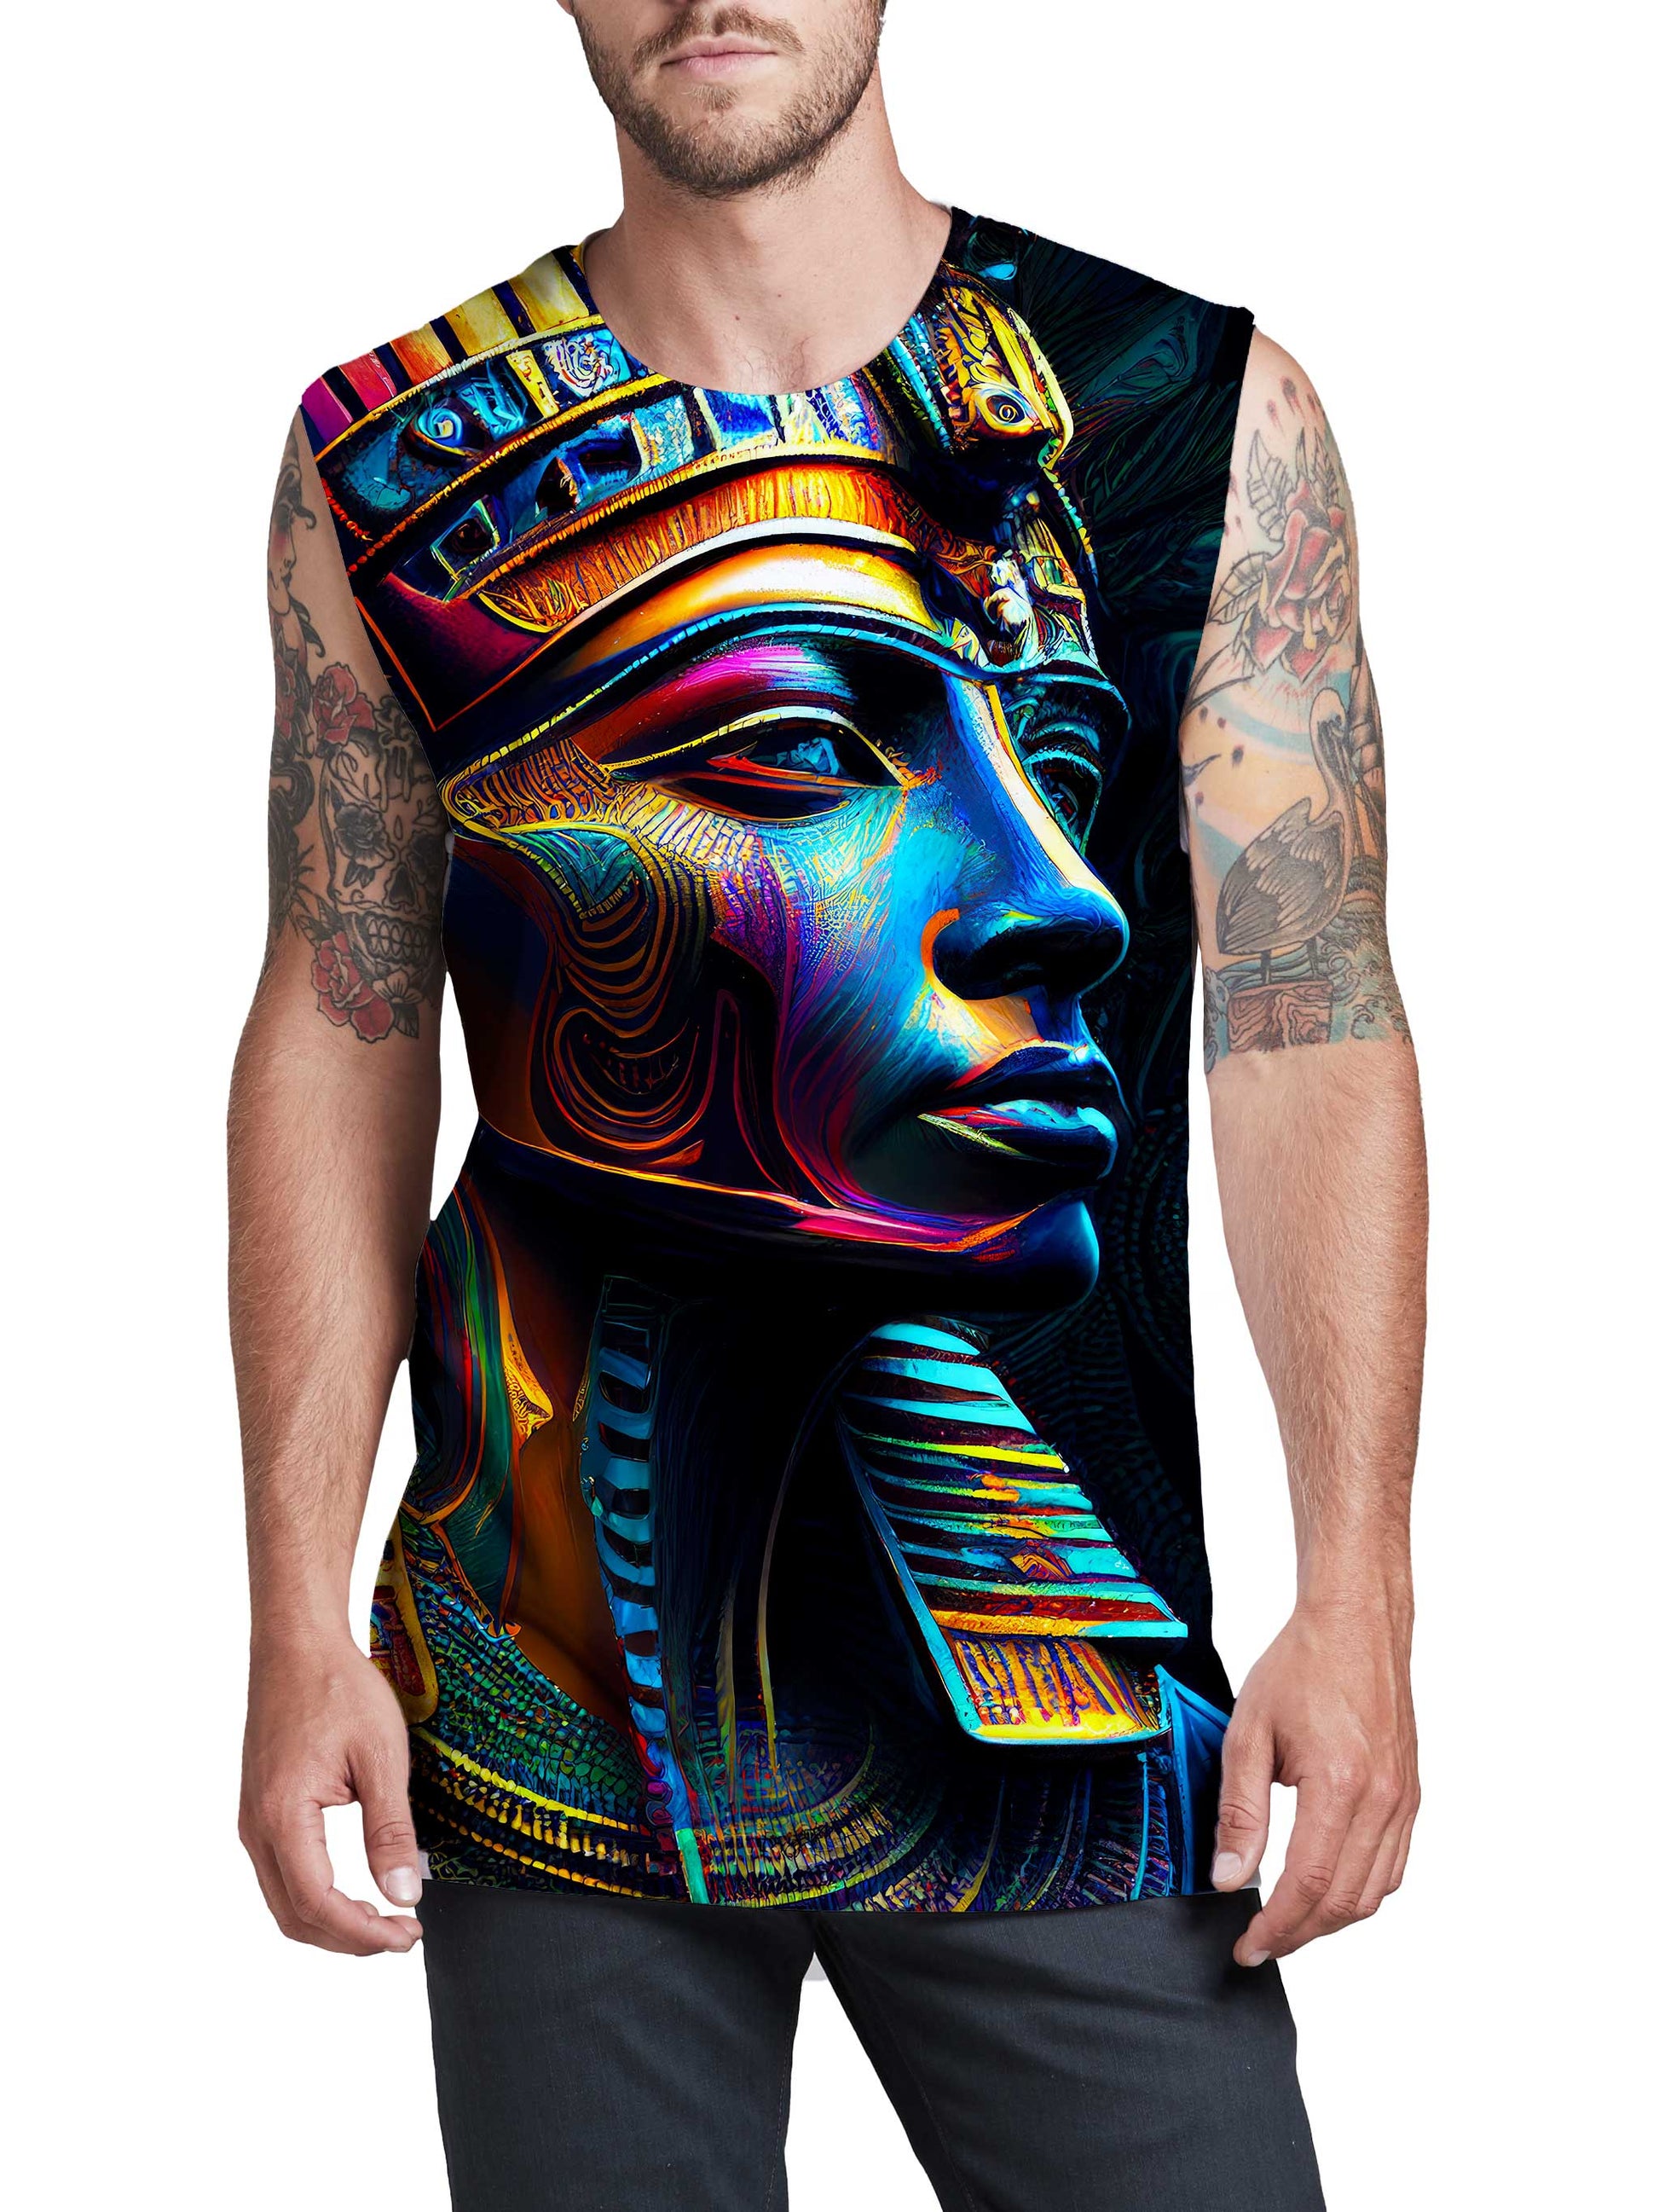 Empires Lost Men's Muscle Tank, iEDM, | iEDM